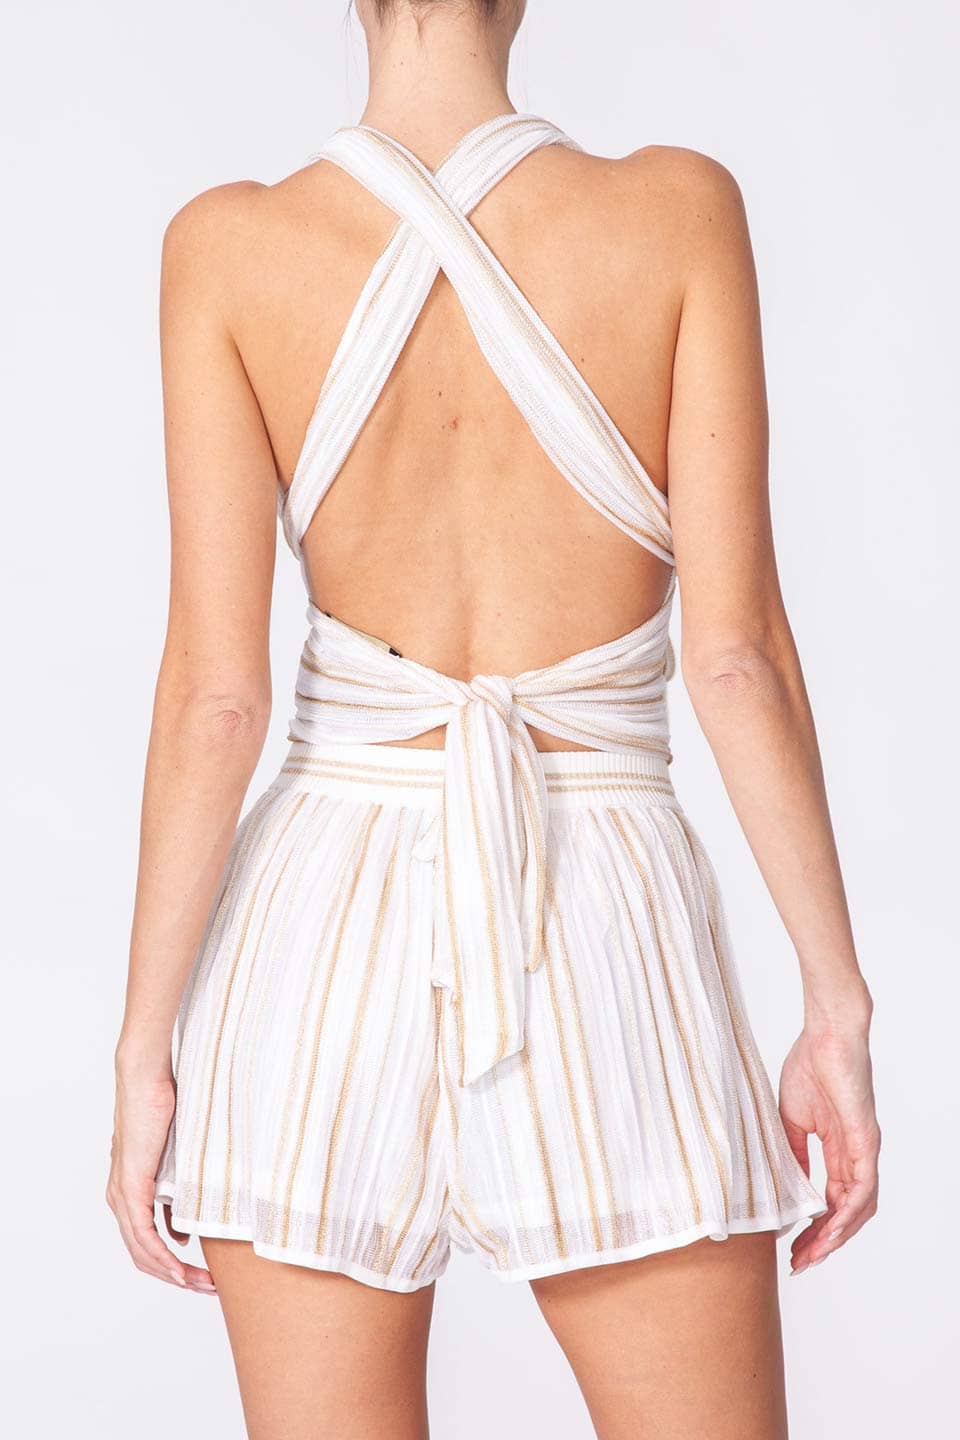 Thumbnail for Product gallery 2, Fashion designer Halter top in white and gold color, product view from behind